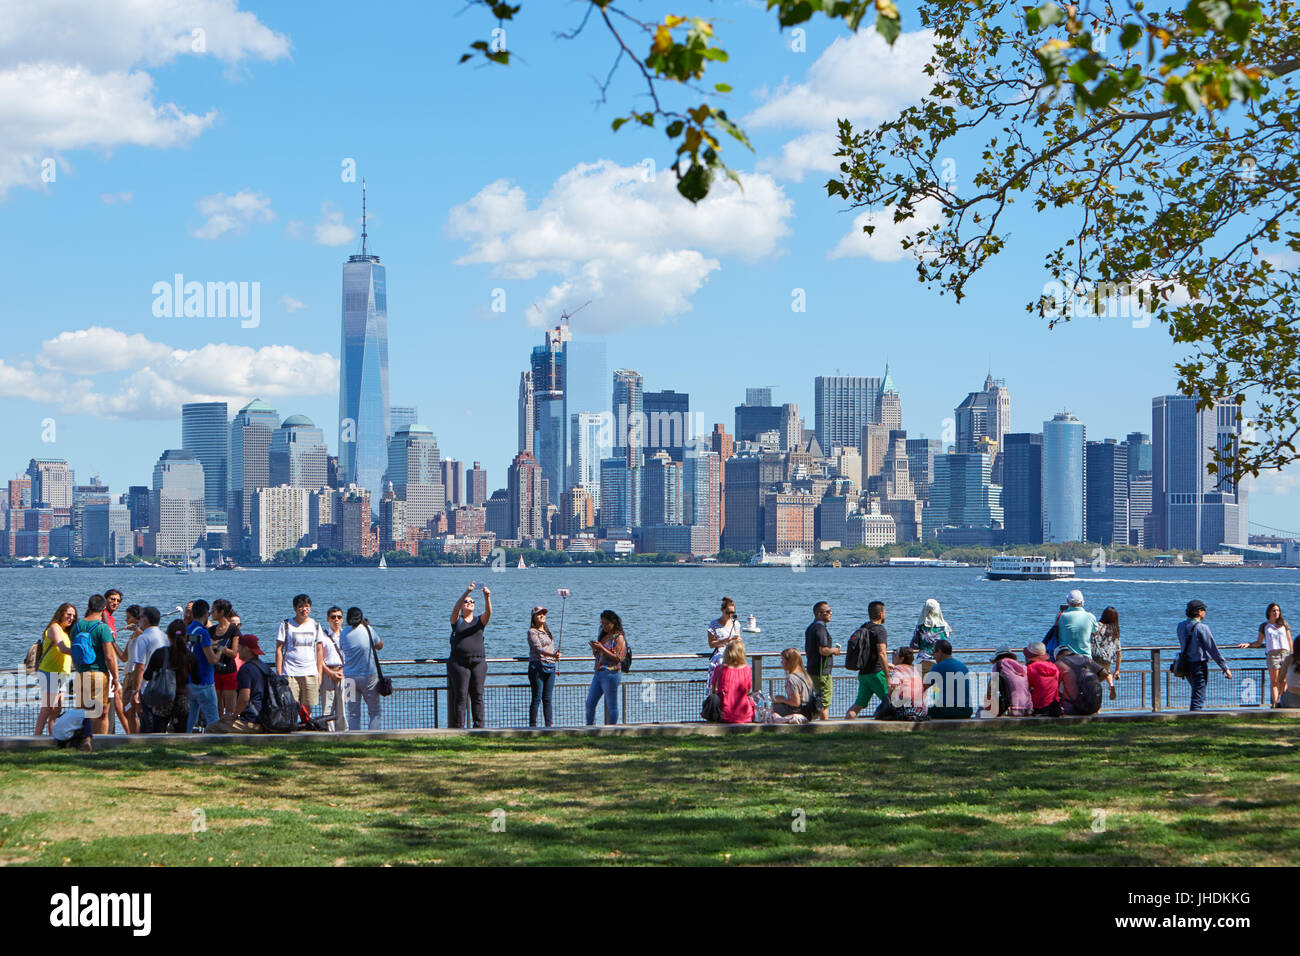 People and tourists shooting selfies and looking at New York city skyline in a sunny day in New York Stock Photo